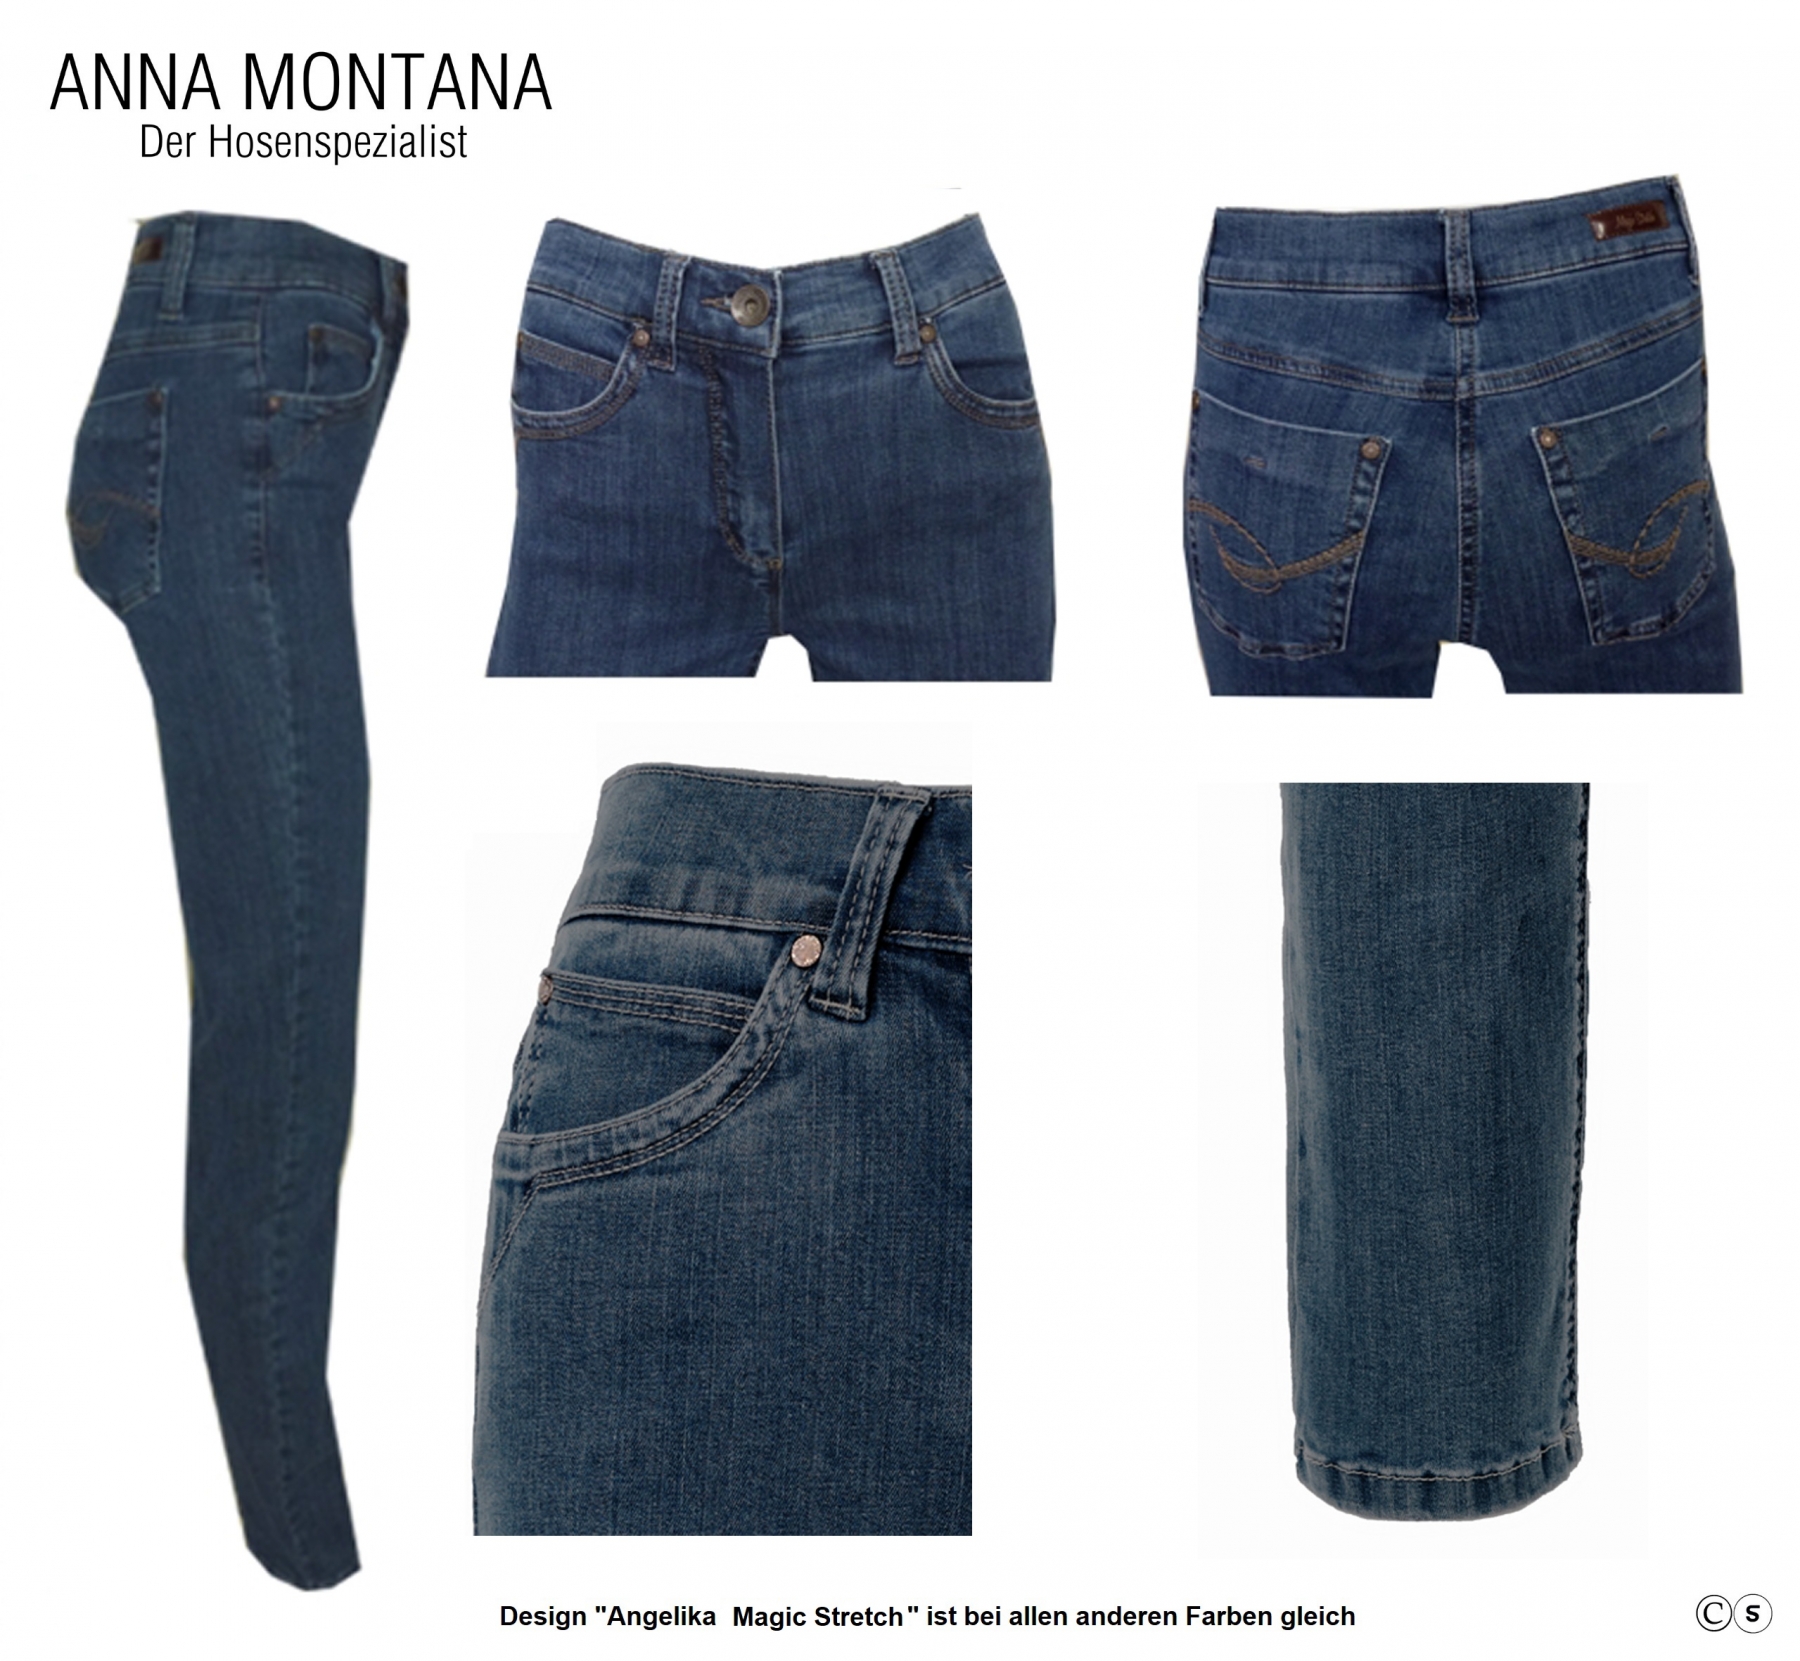 Angelika 1975, reduces / ER / Magic Stretch Trousers /Jeans ANNA MONTANA